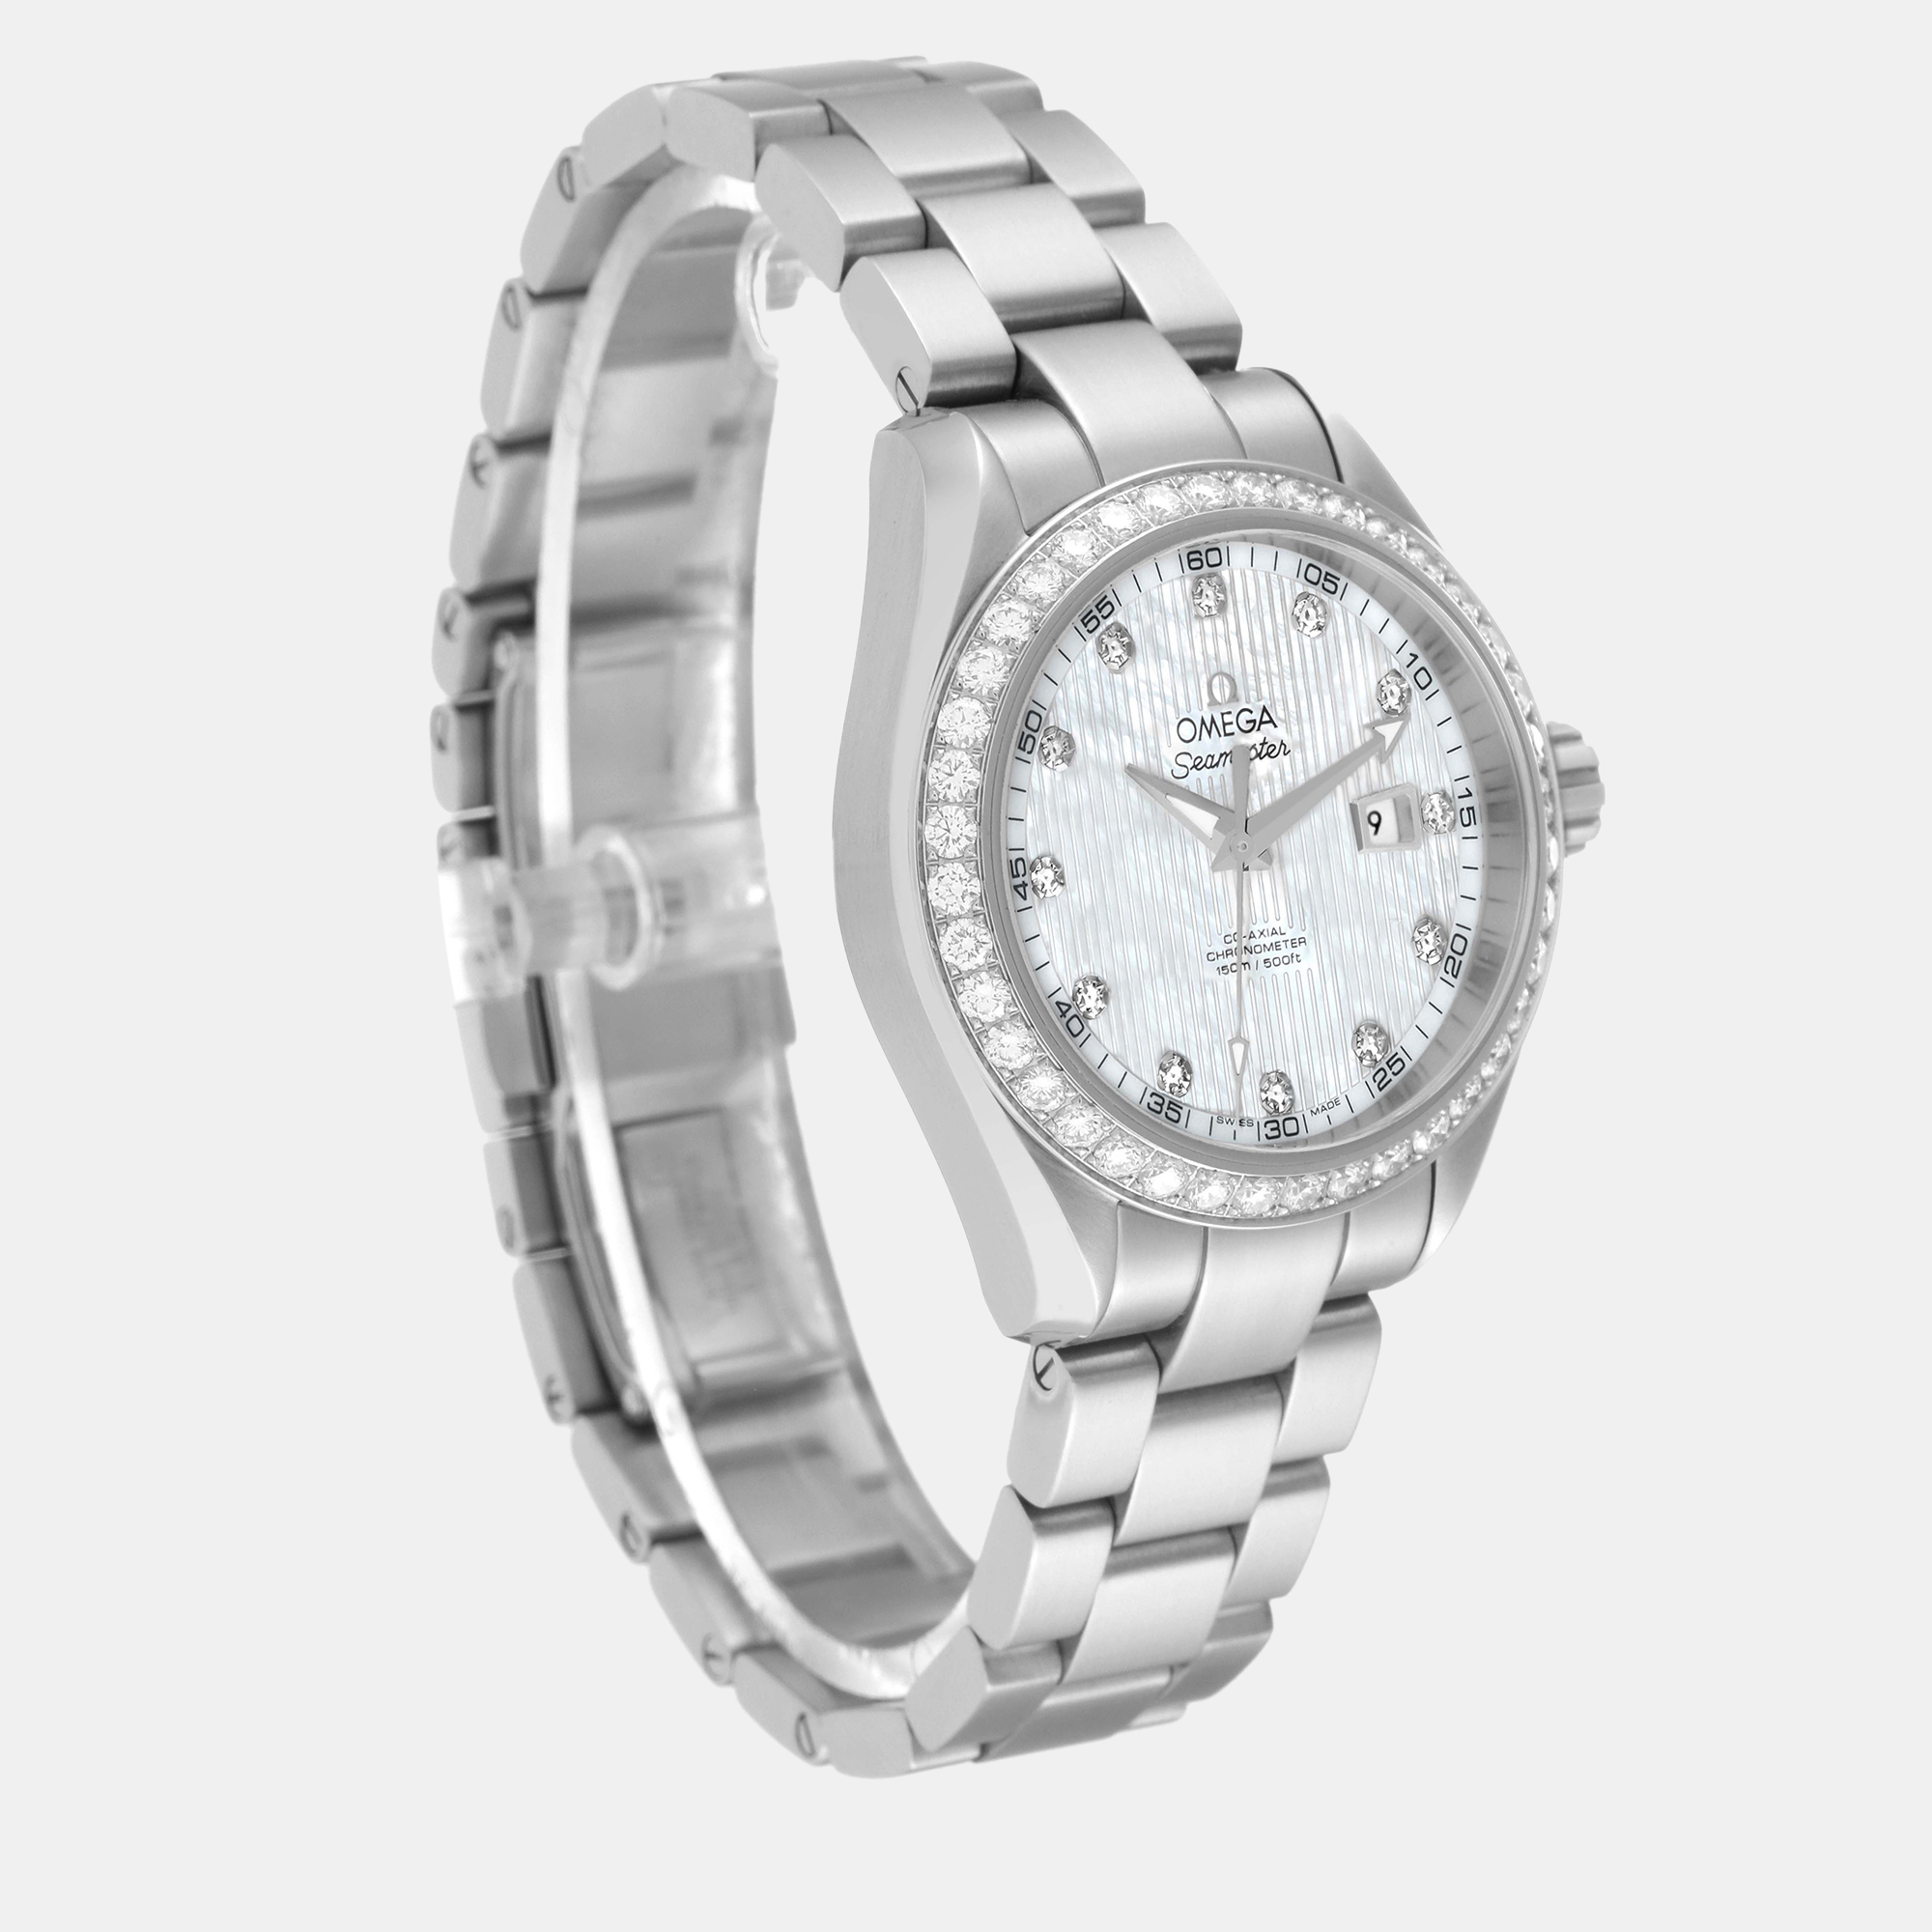 Omega Silver Mother Of Pearl Diamond Stainless Steel Aqua Terra 231.15.34.20.55.001 Automatic Women's Wristwatch 34 Mm